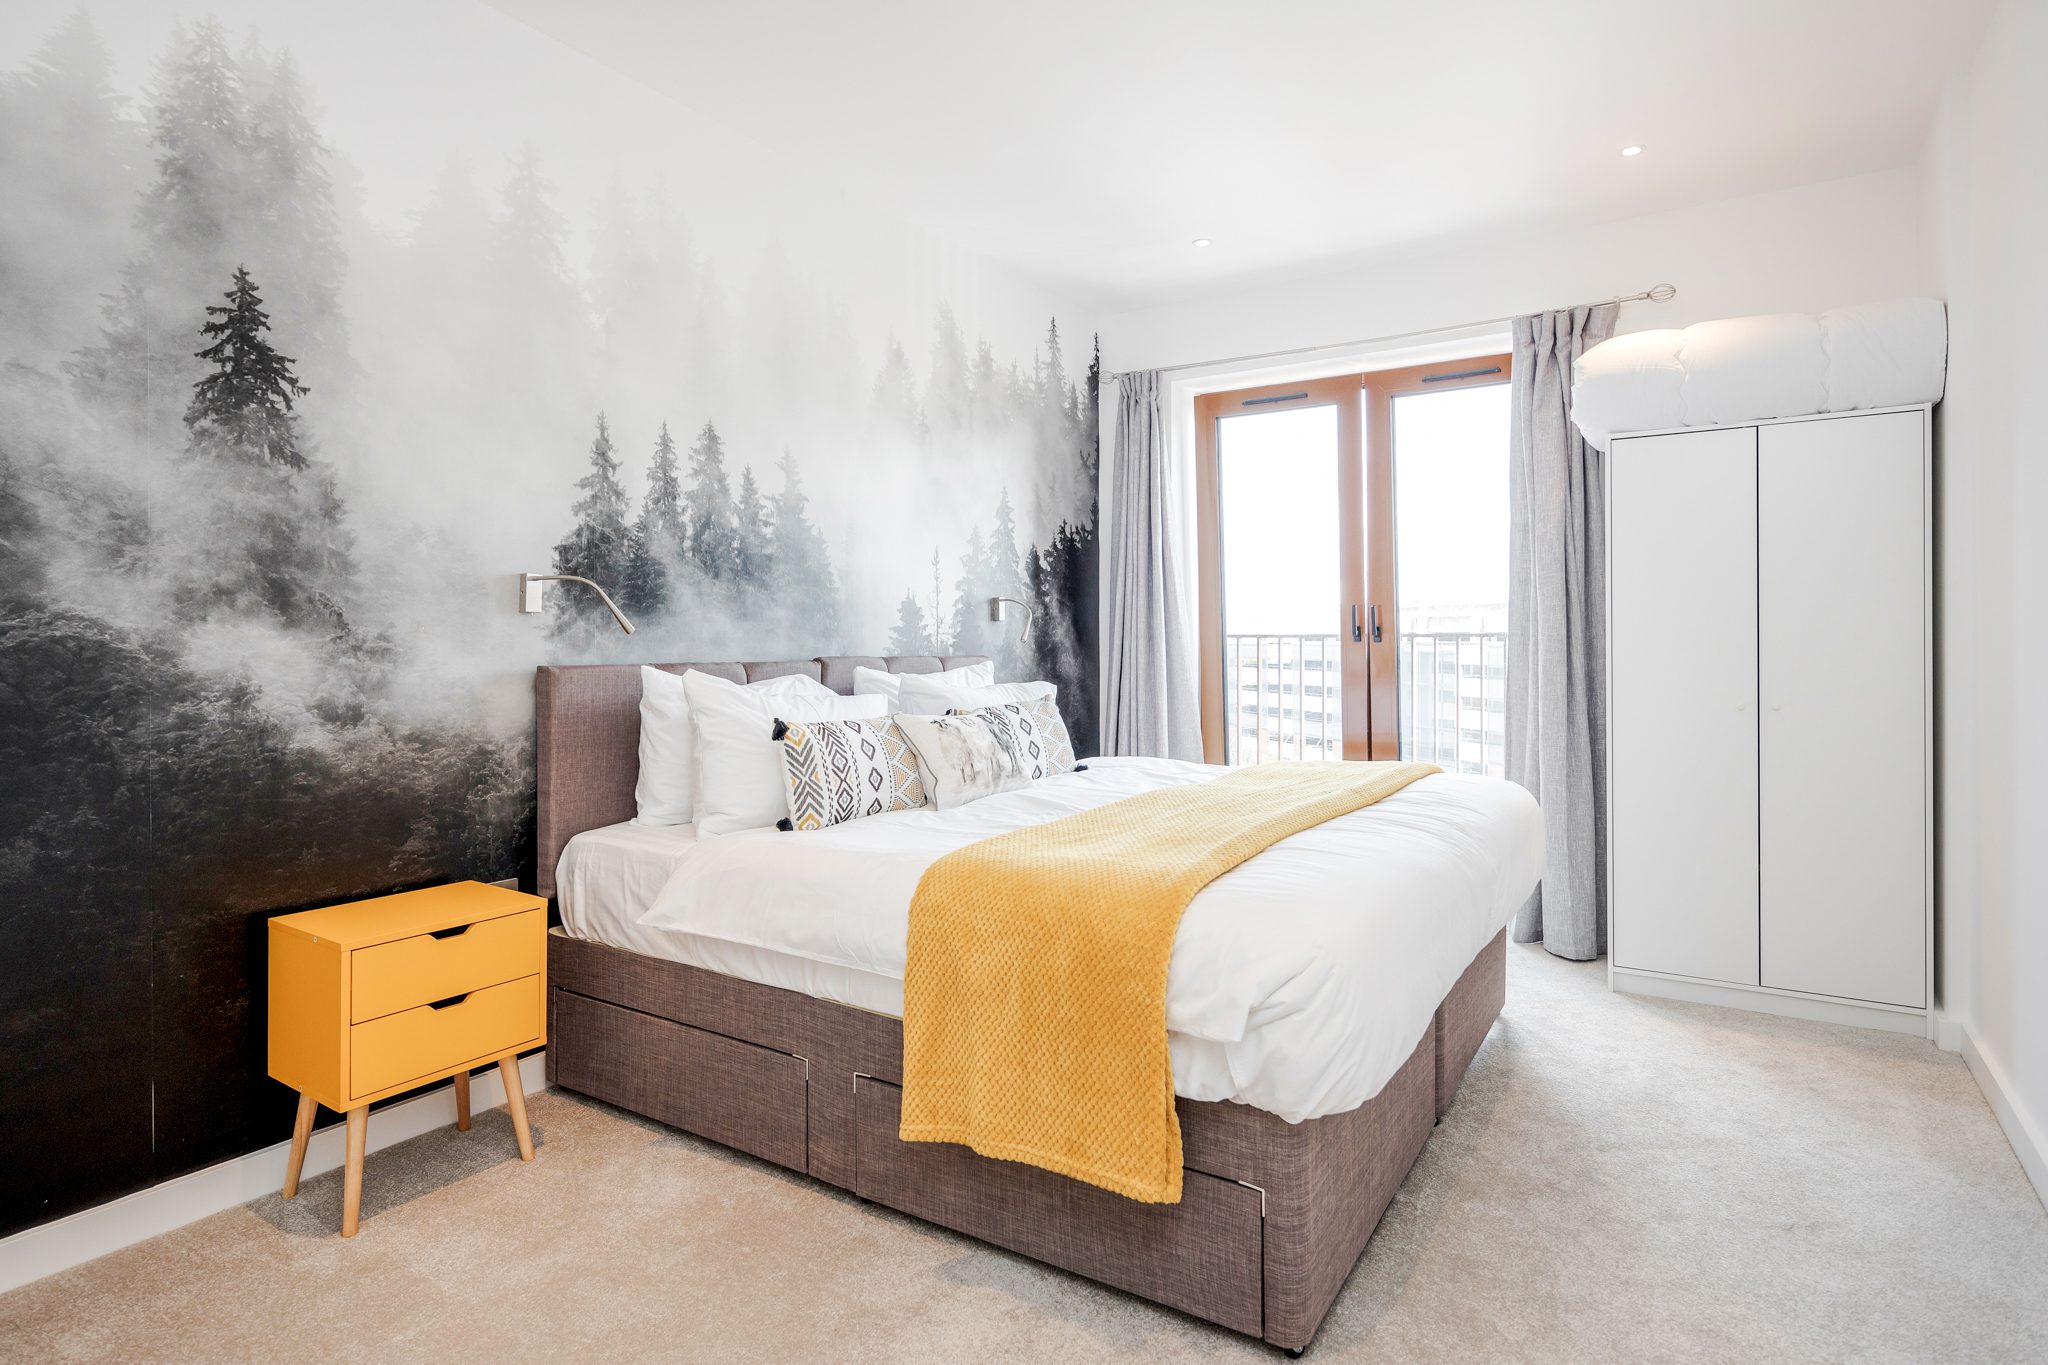 Modern Serviced Accommodations St Albans | Comfortable Short Let Apartments | Free Wifi | Fully Equipped Kitchen | pet-friendly options | Flat Screen TV | 0208 6913920 | Urban Stay.